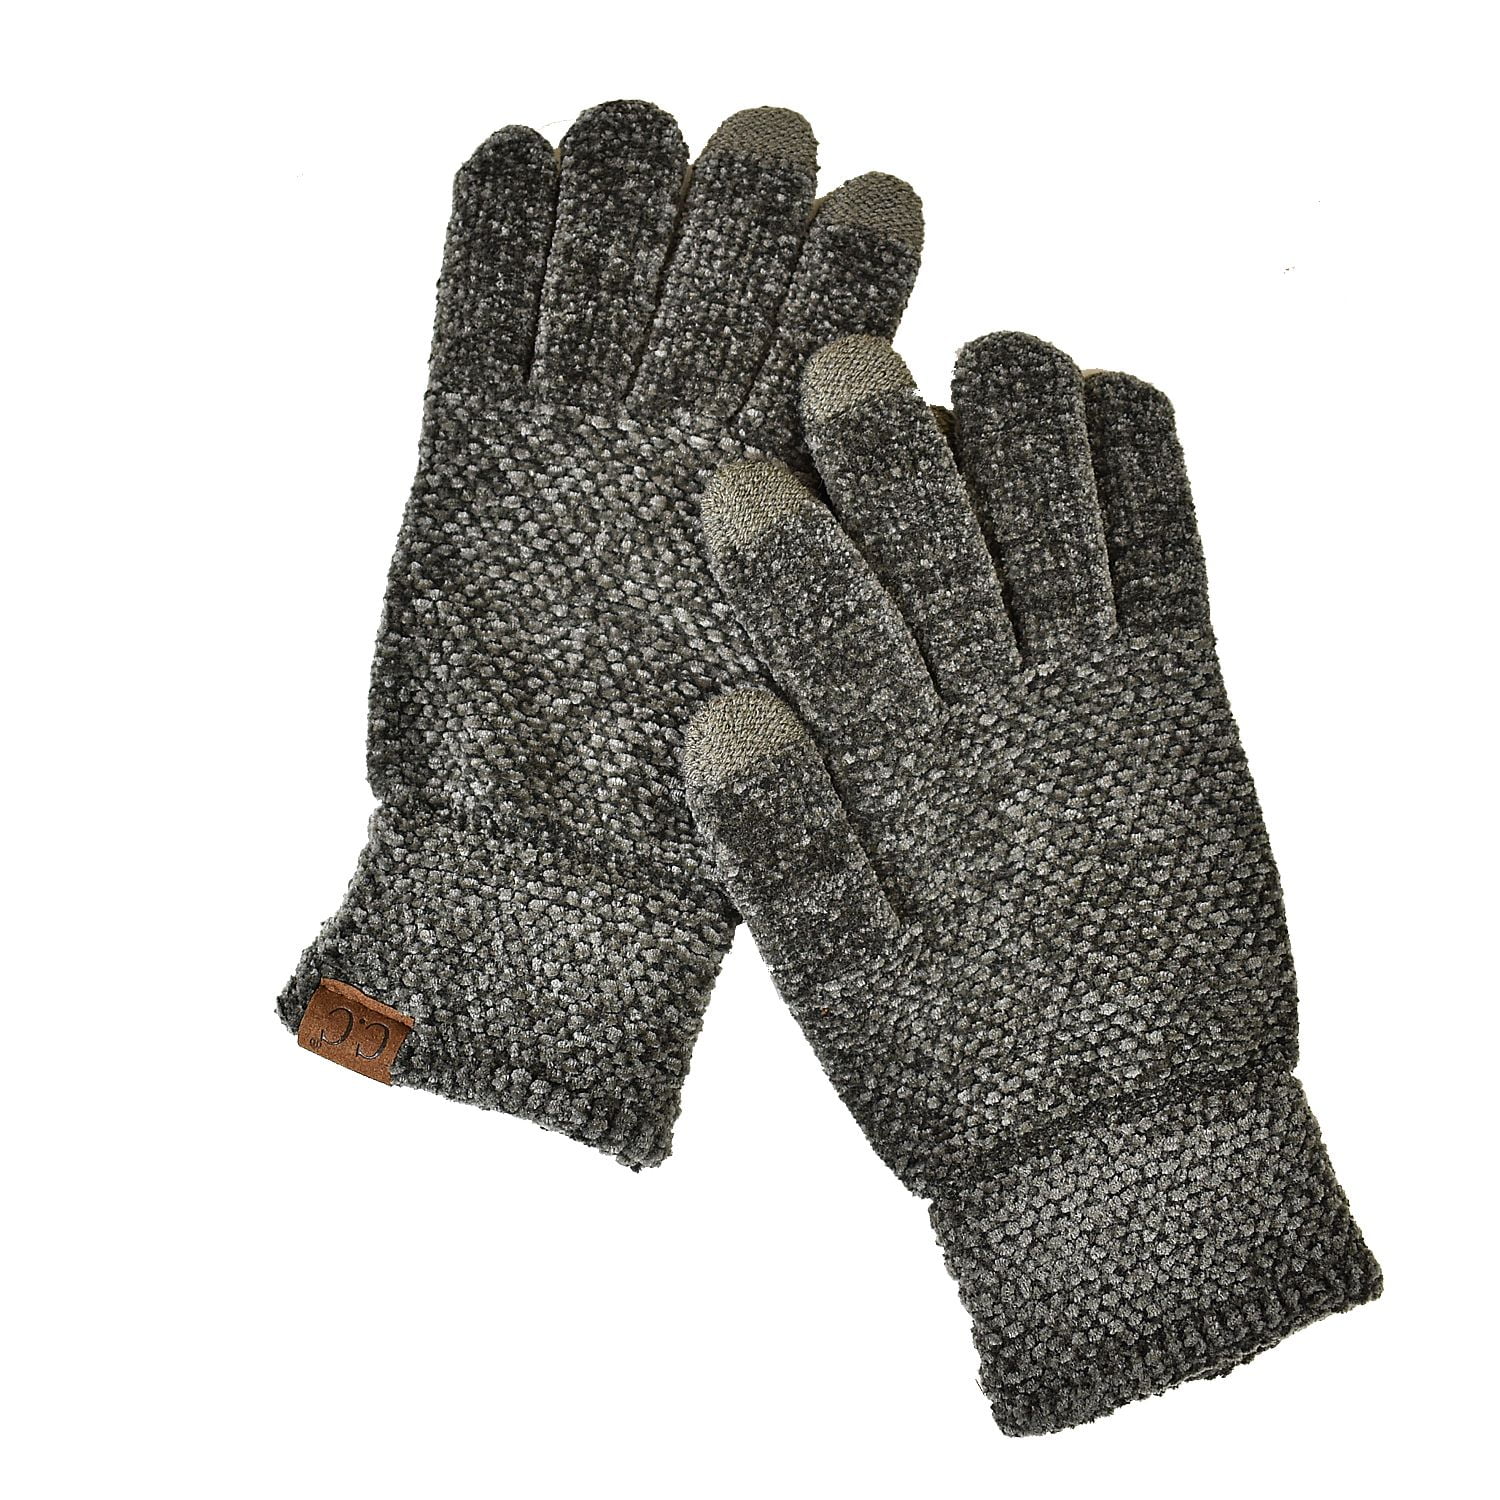 Warm Texting Winter Chenille Rose Knit C.C Gloves, Eco-Friendly Touchscreen